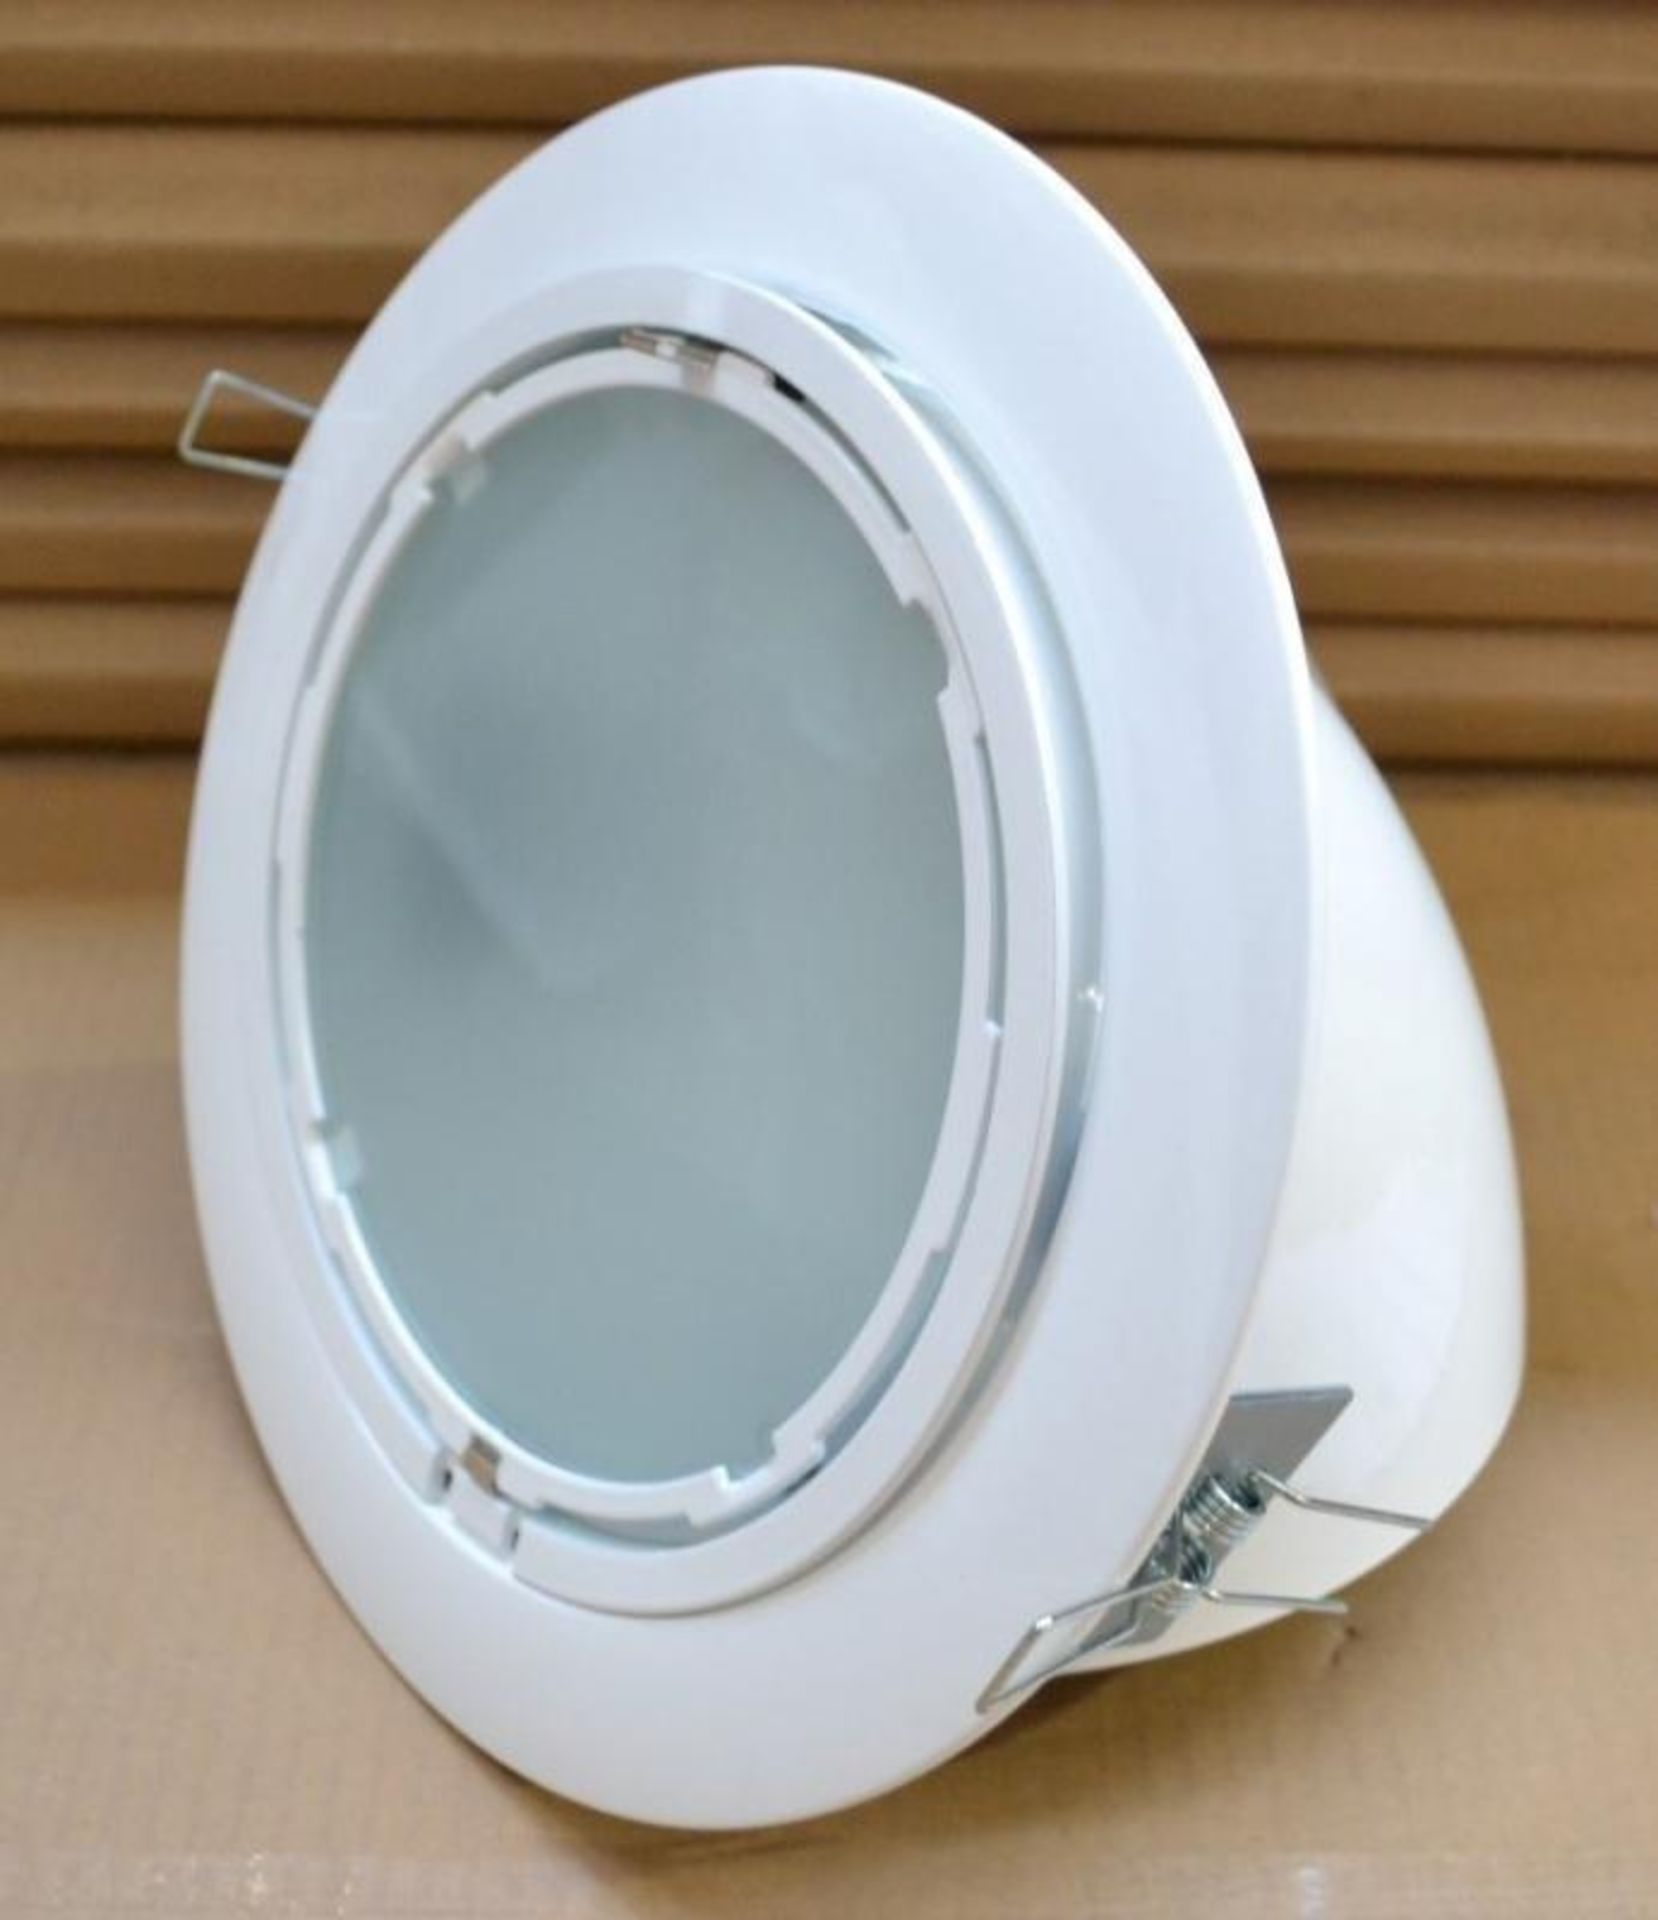 10 x JCC Lighting JC16006 Calida Large Wallwash Downlights With Frosted Lens - Colour: White - New/U - Image 4 of 7